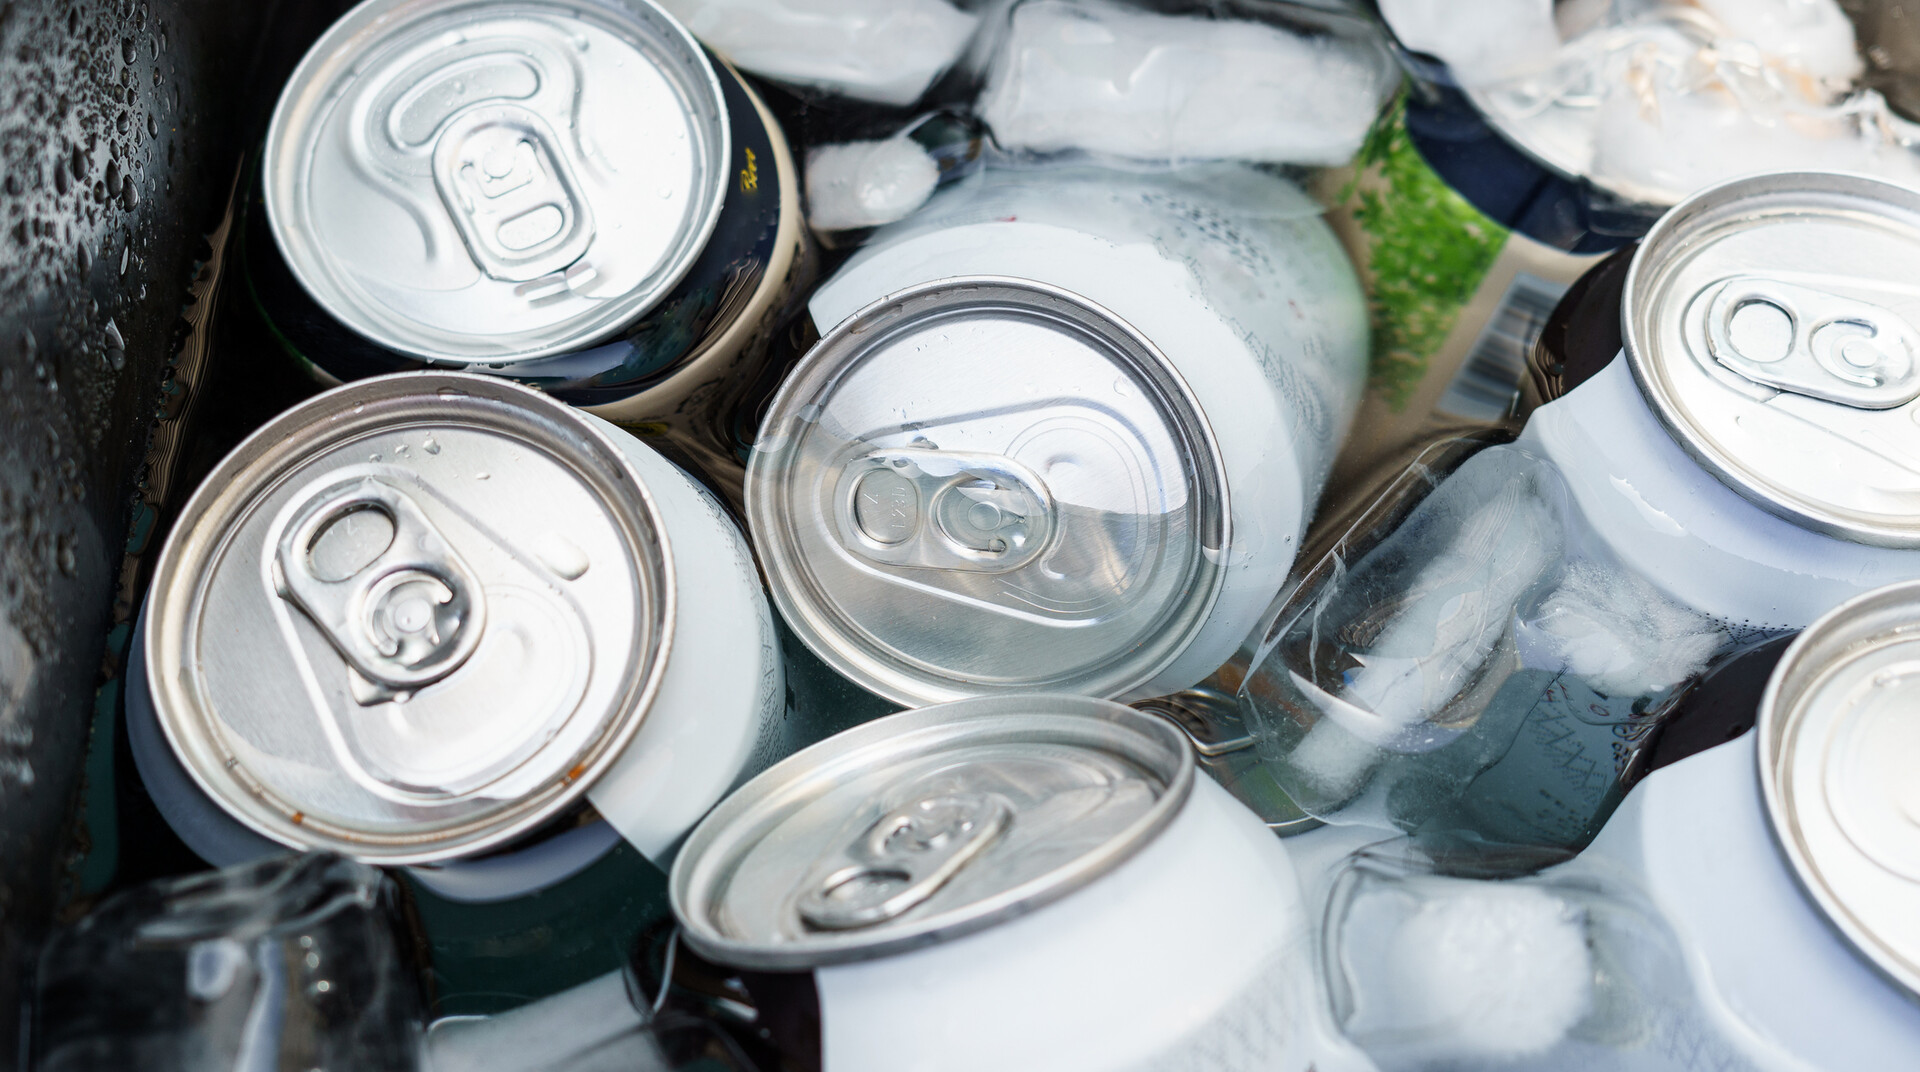 <p>Aluminum Cans Leading the Way to Limit Carbon Impact</p>
